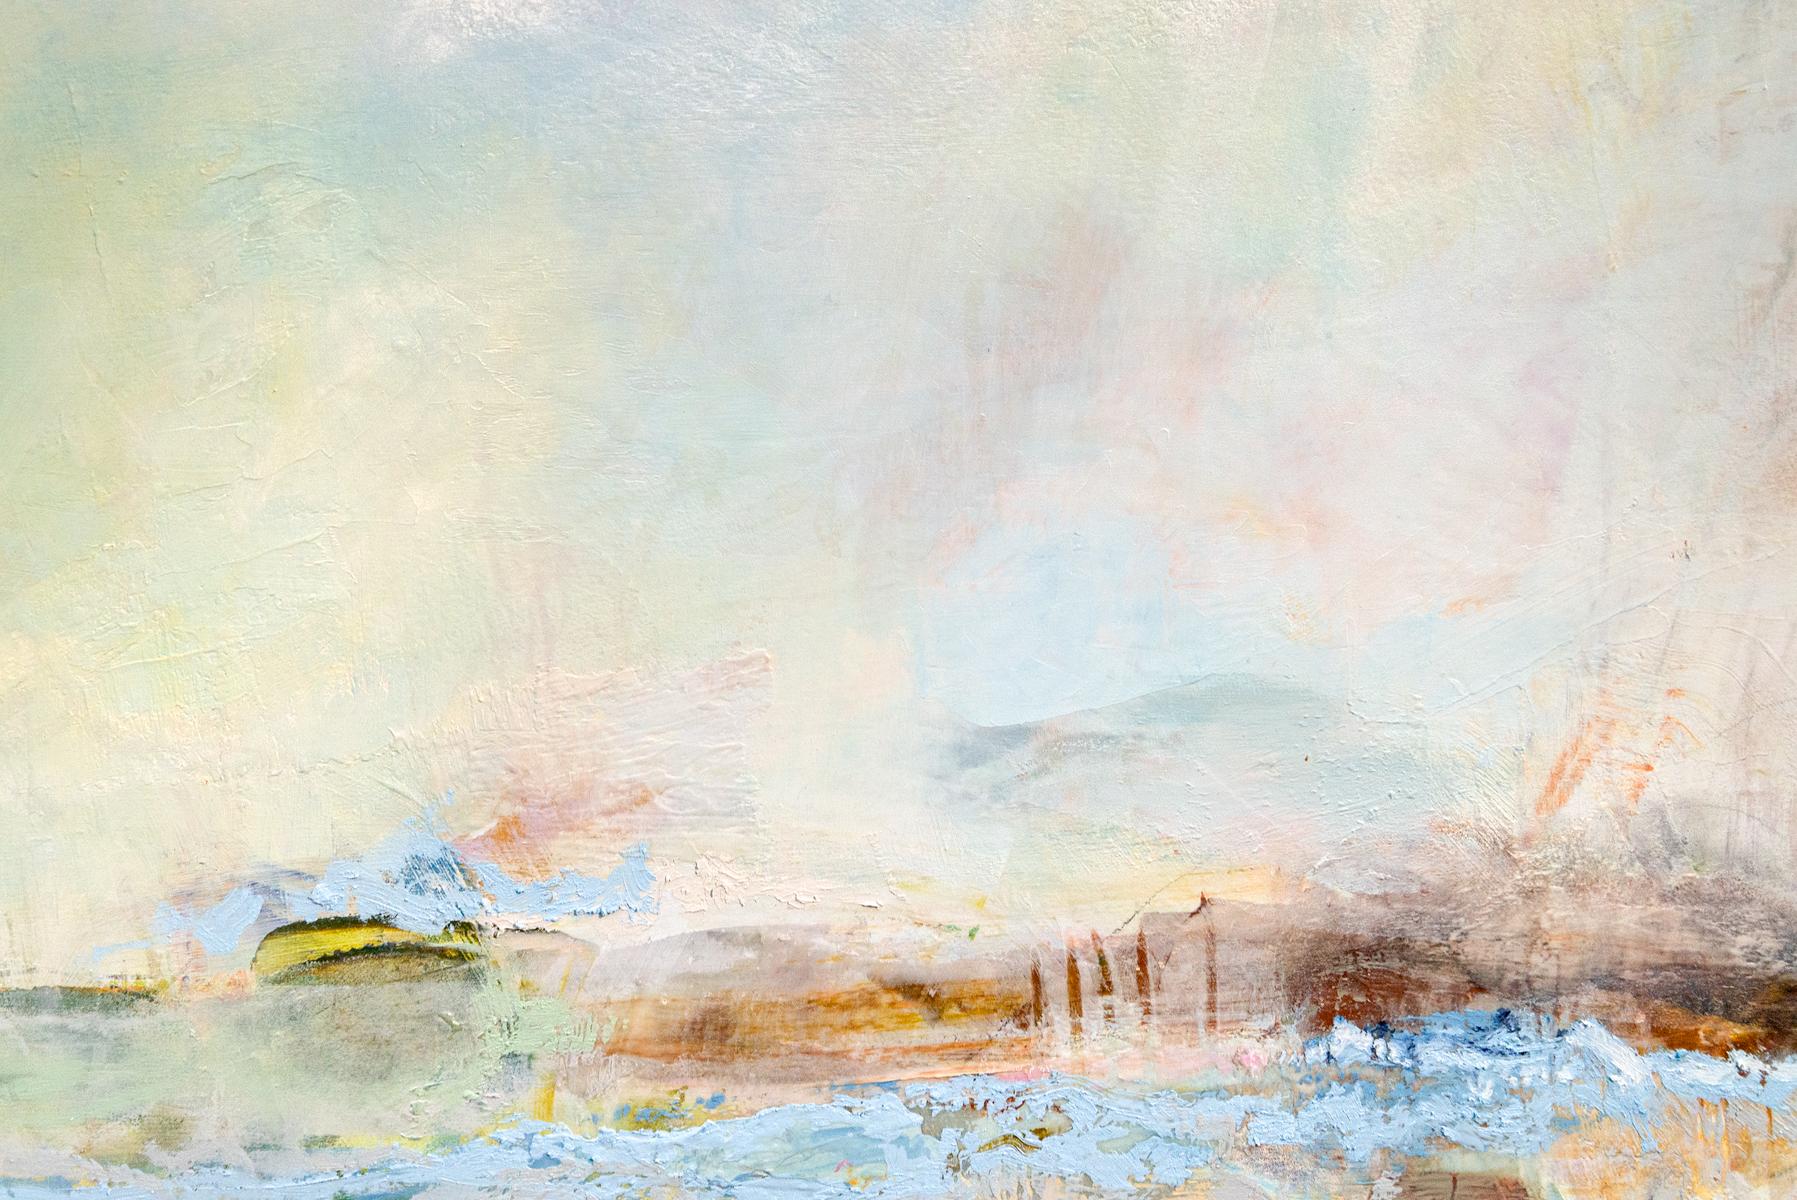 Roam - soft, cool, textured, abstracted landscape, mixed media, acrylic on panel - Gray Abstract Painting by Sharon Kelly